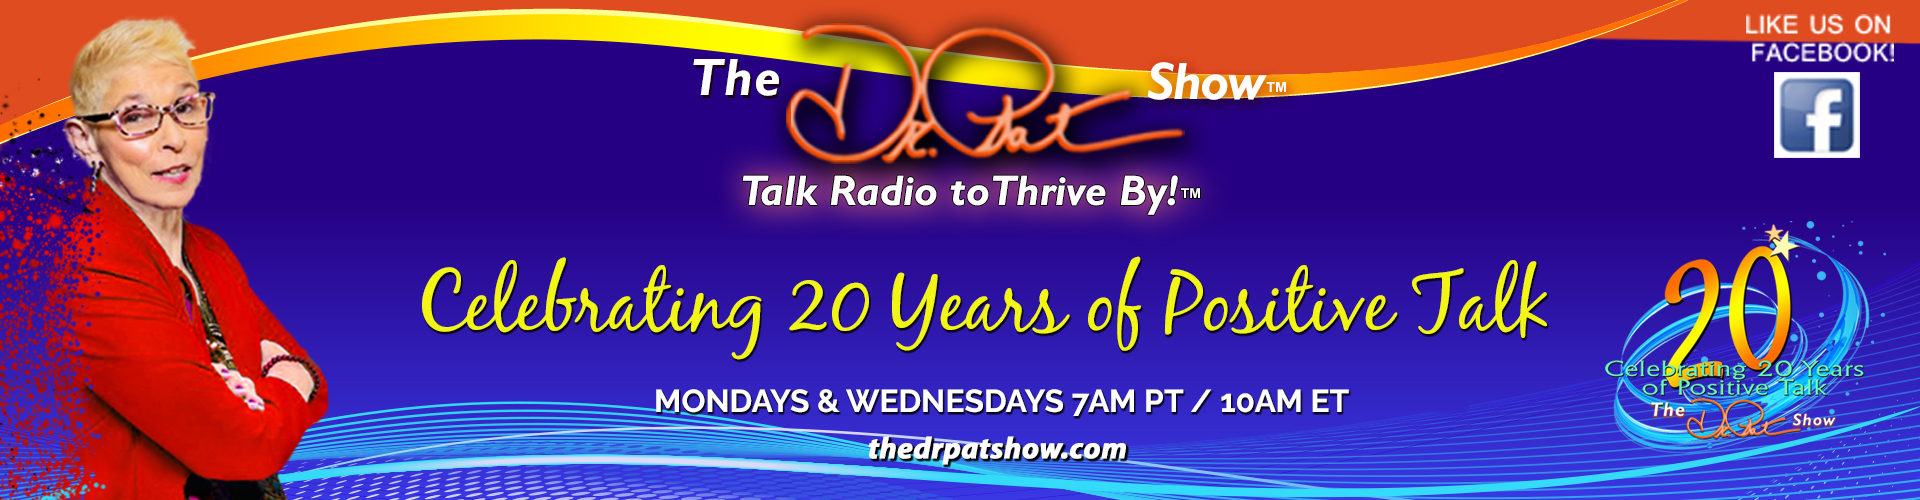 The Dr. Pat Show Celebrating 20 yrs of Positive Talk